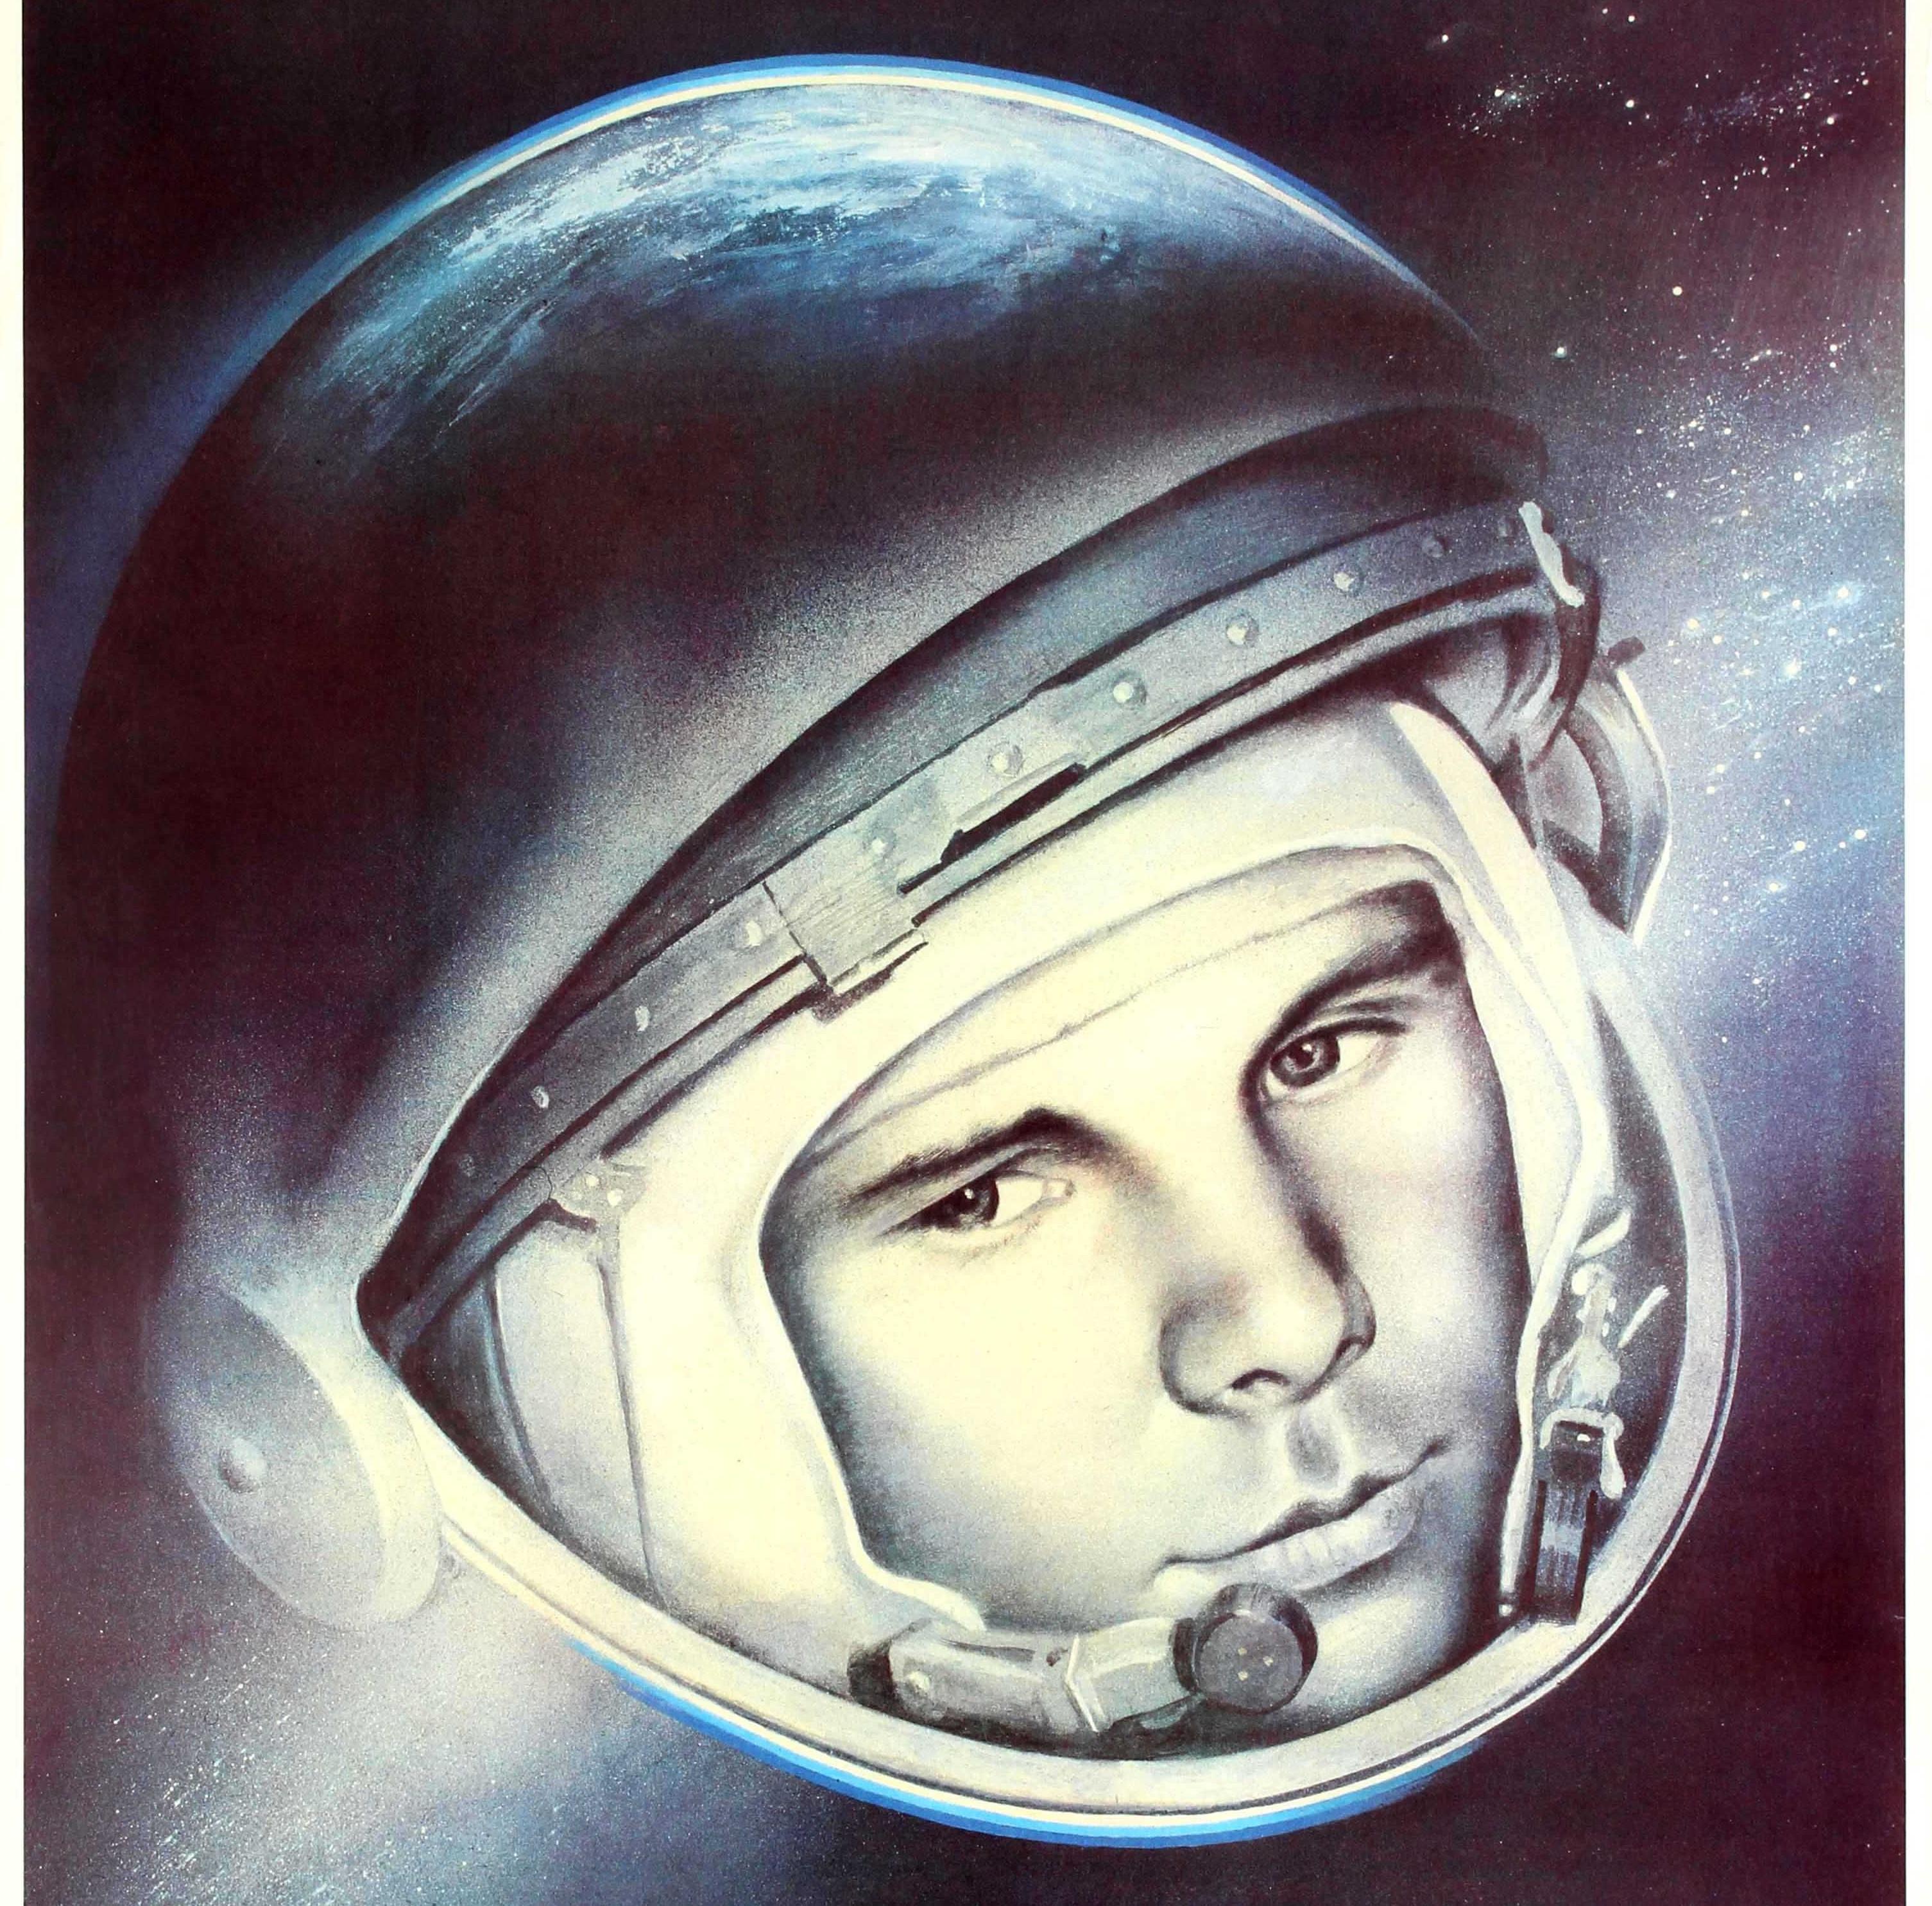 Original vintage Soviet propaganda poster featuring a great image of the first man in space - on 12 April 1961 - the pilot and cosmonaut Yuri Gagarin (Yuri Alekseyevich Gagarin; 1934-1968) with his helmet blending in to form the earth with stars in